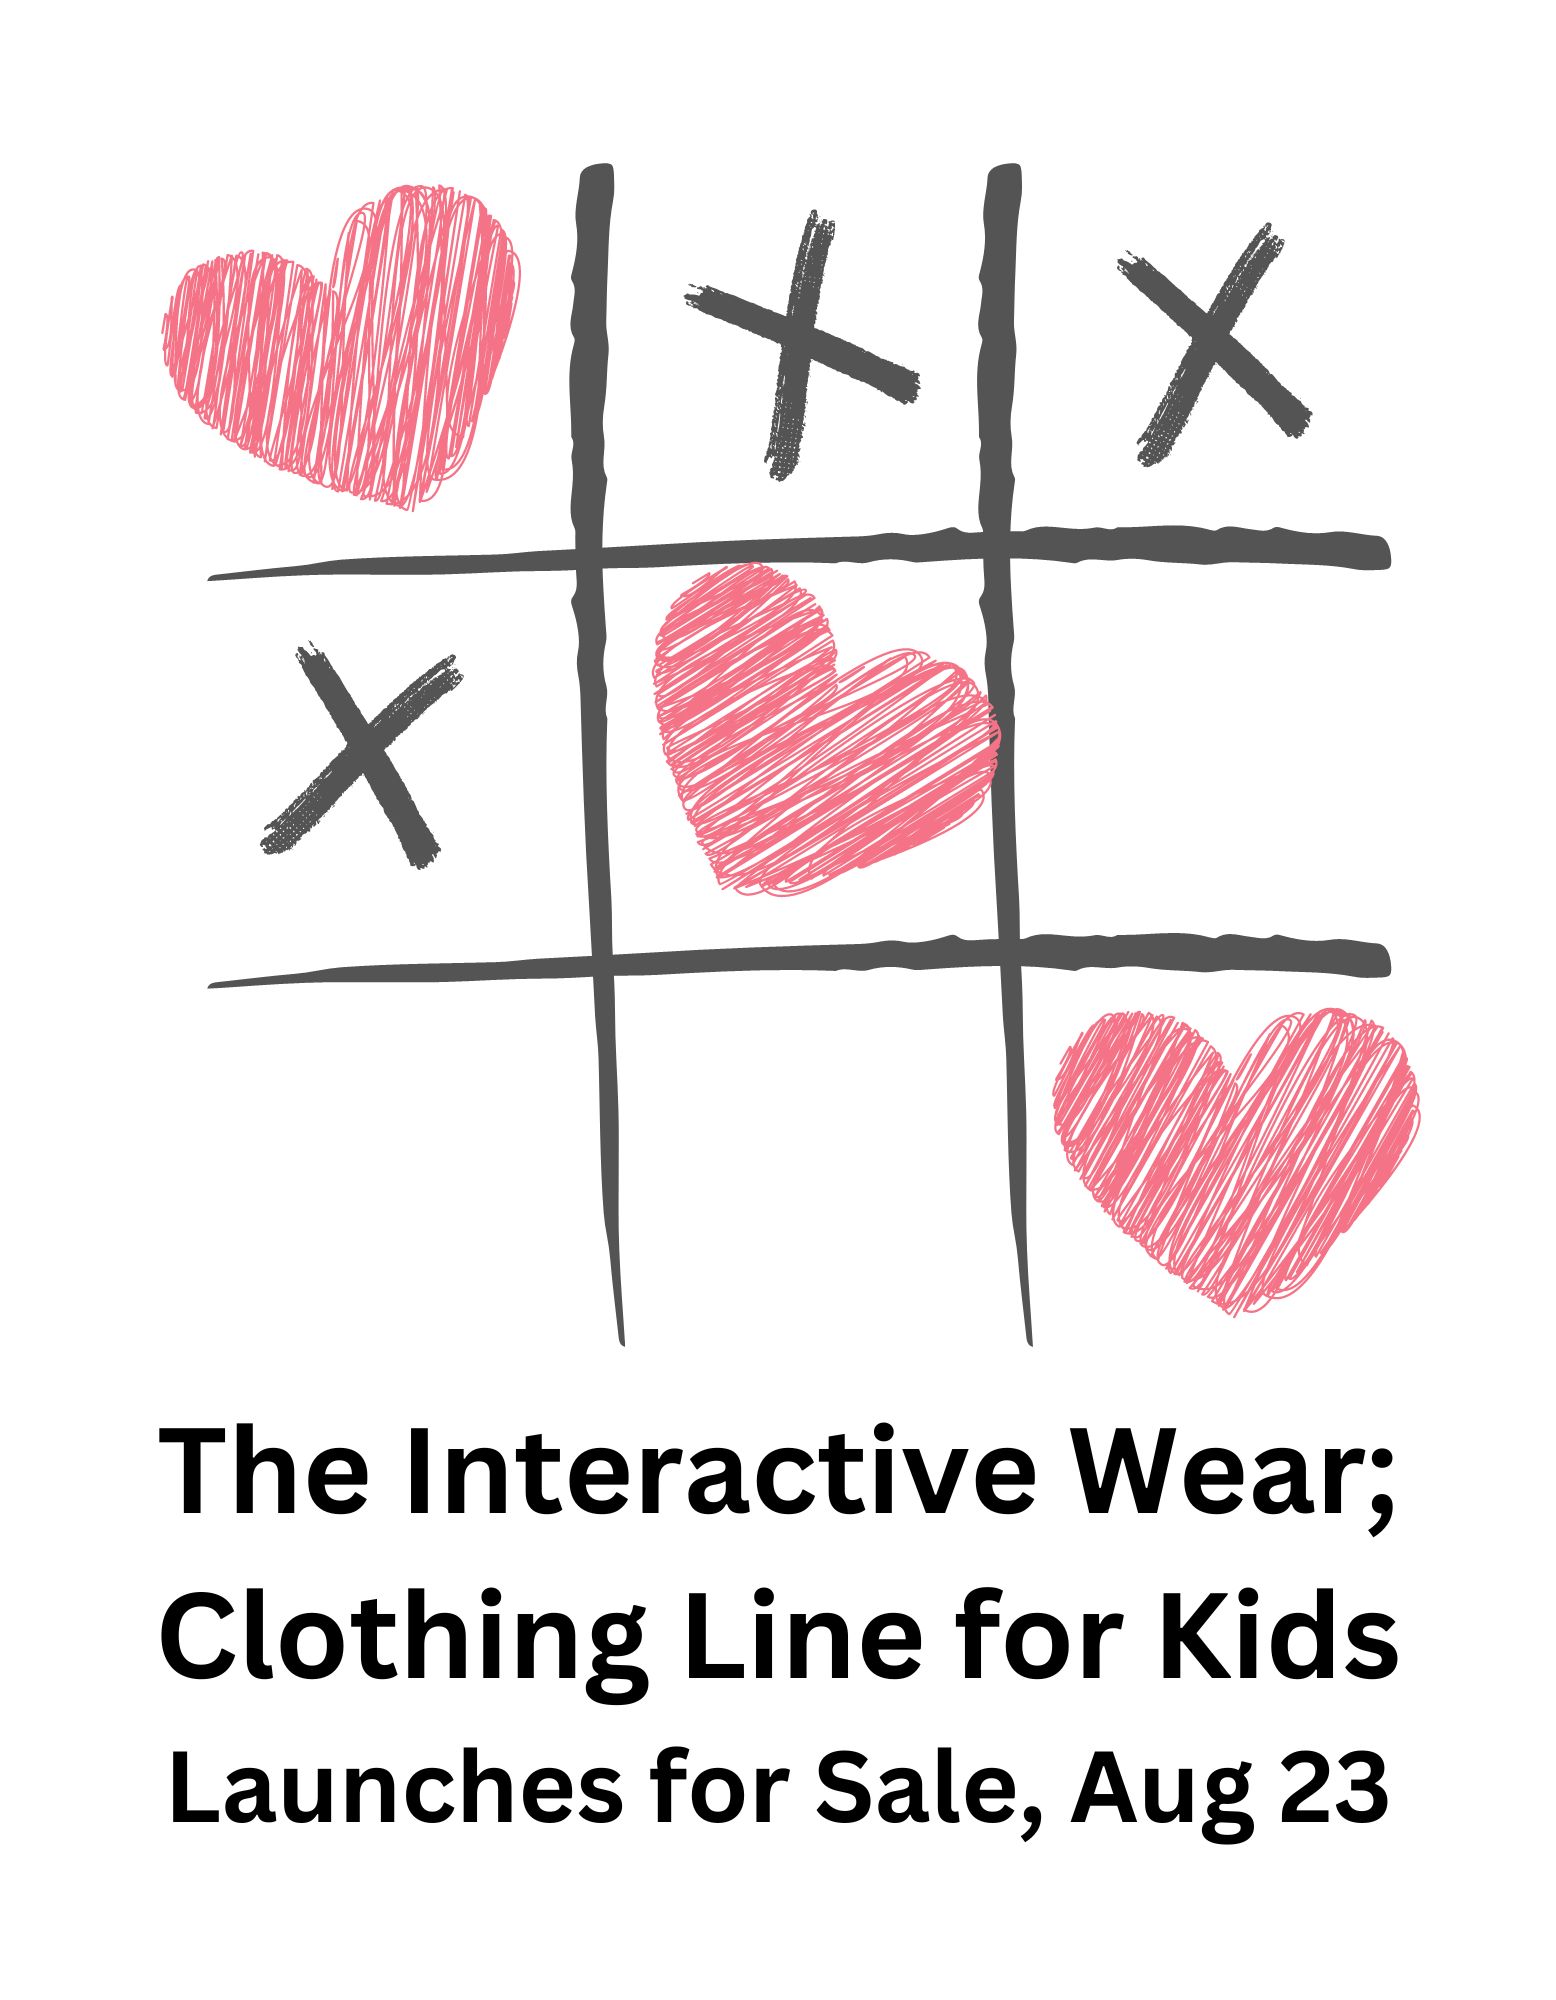 The Interactive Wear Clothing Line